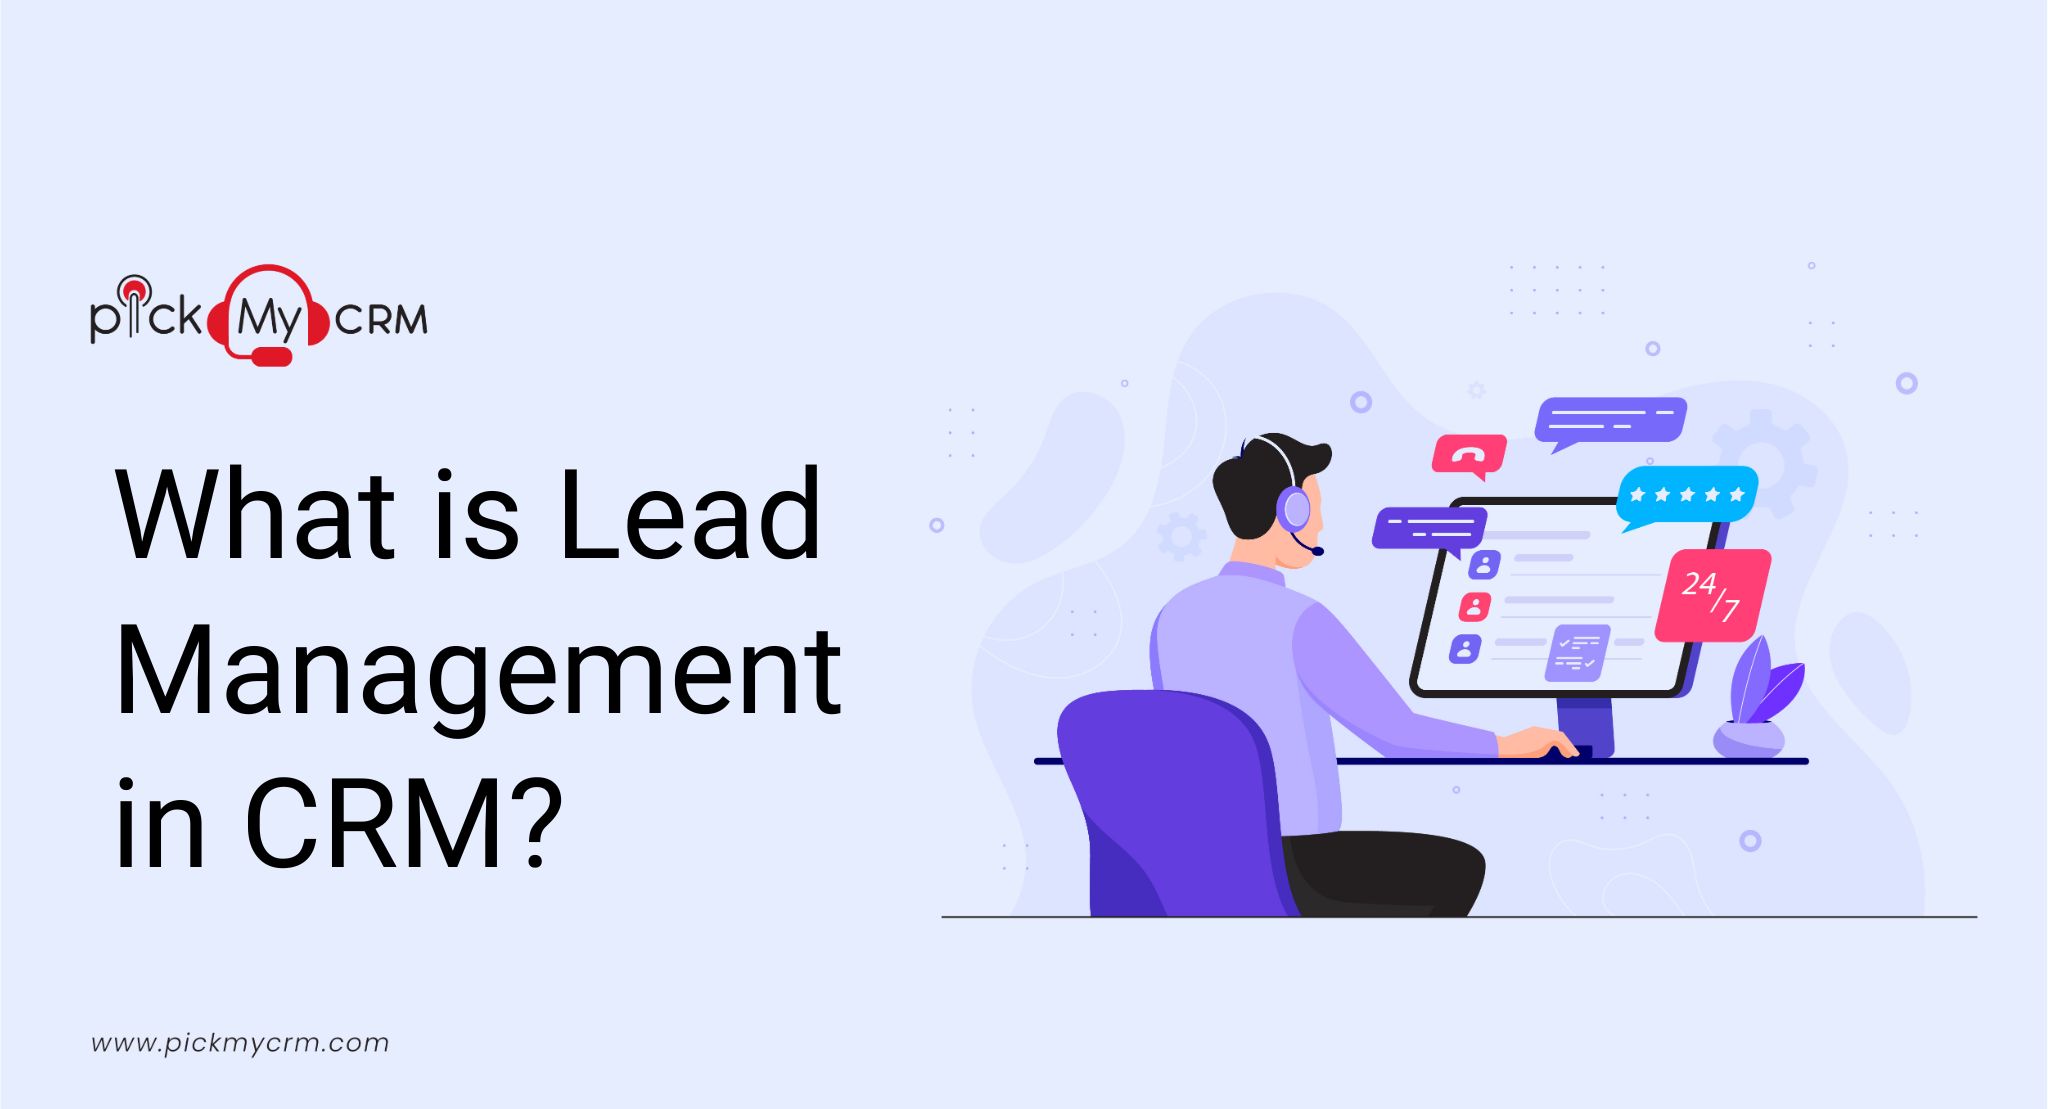 What is Lead Management in CRM?